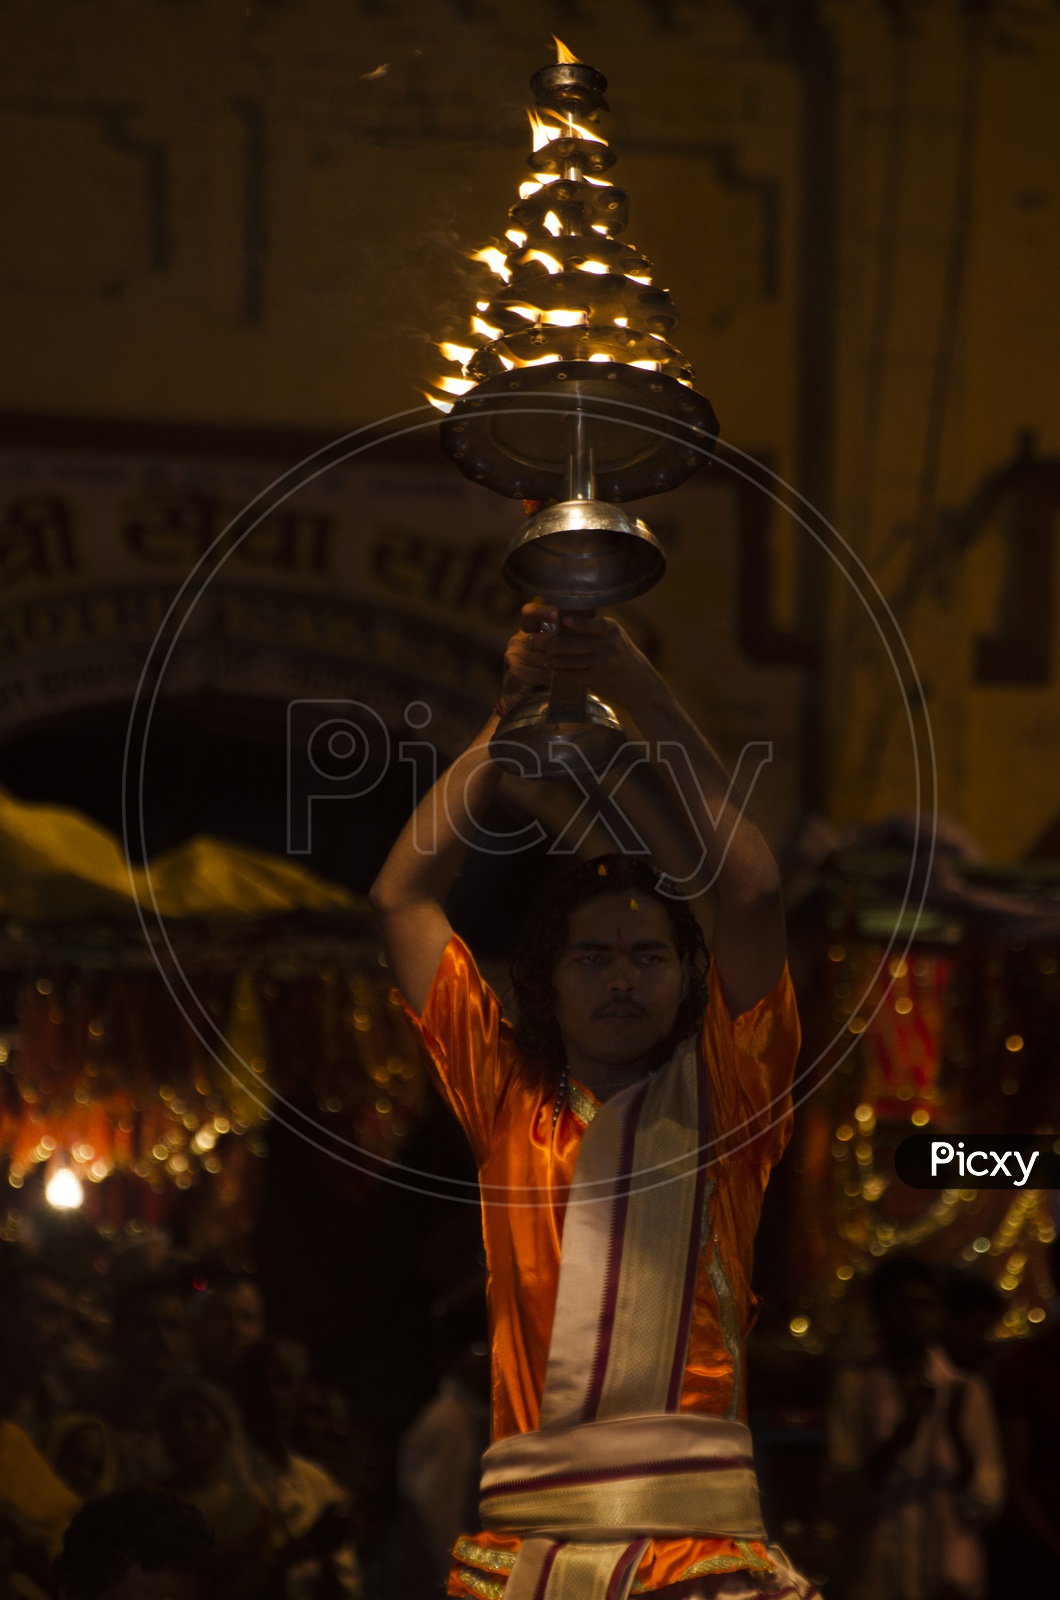 Archaka carrying the lamp ornament